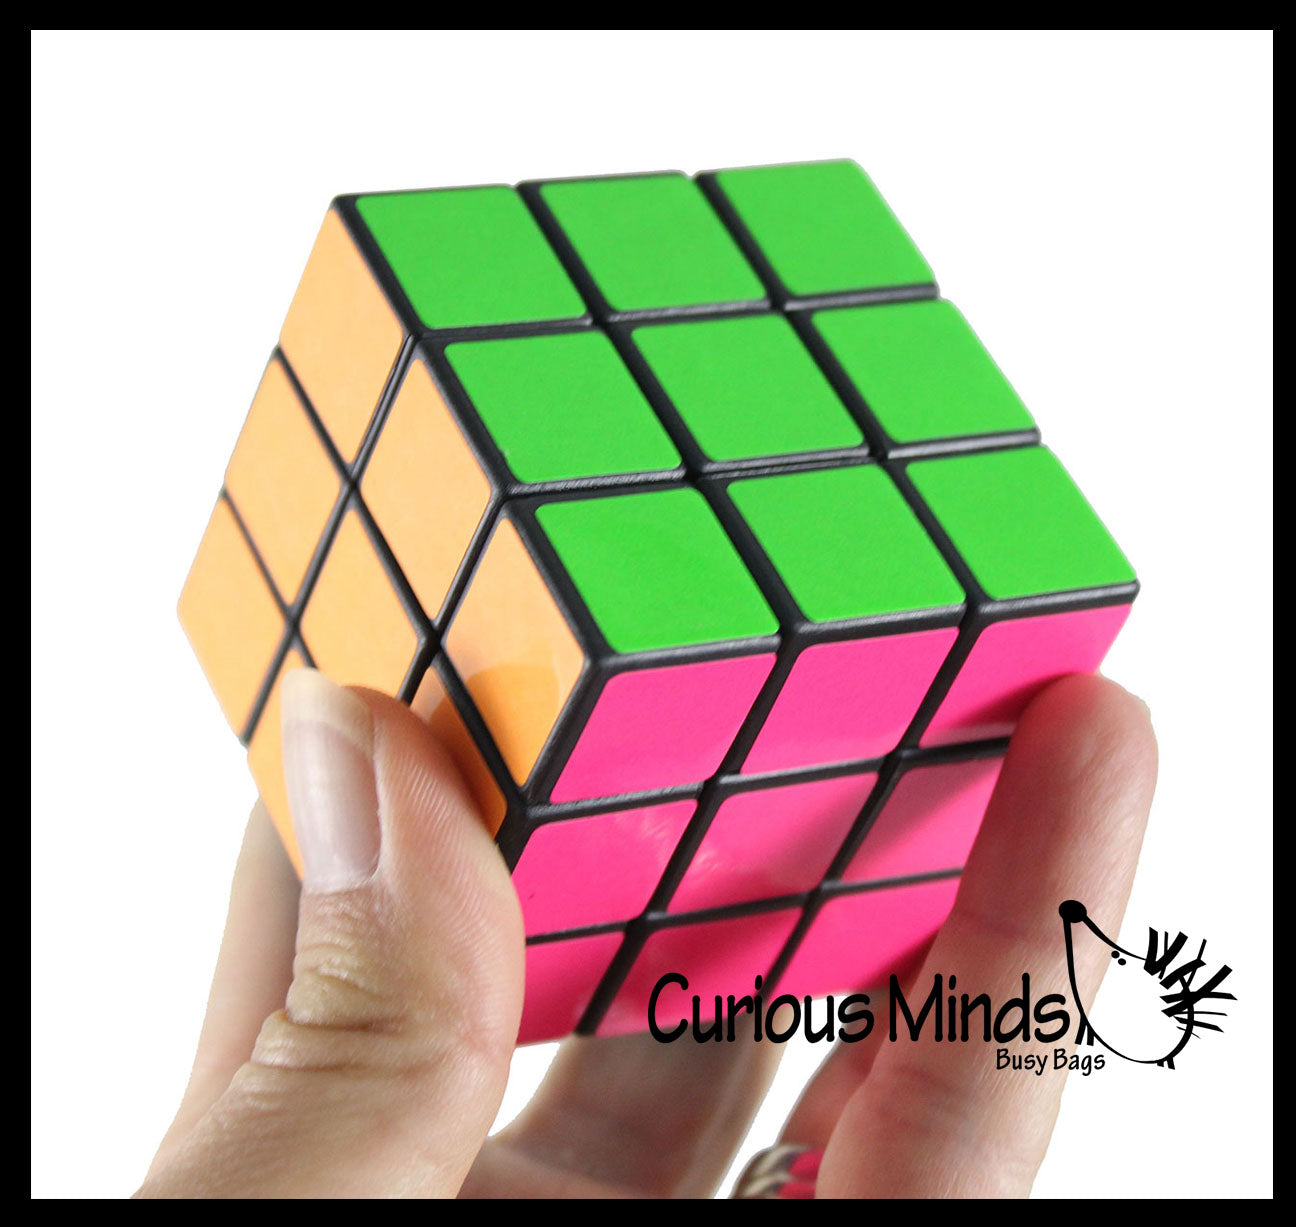 Neon 3x3 Multi-Colored Puzzle Speed Cube Games - Problem-Solving Brain